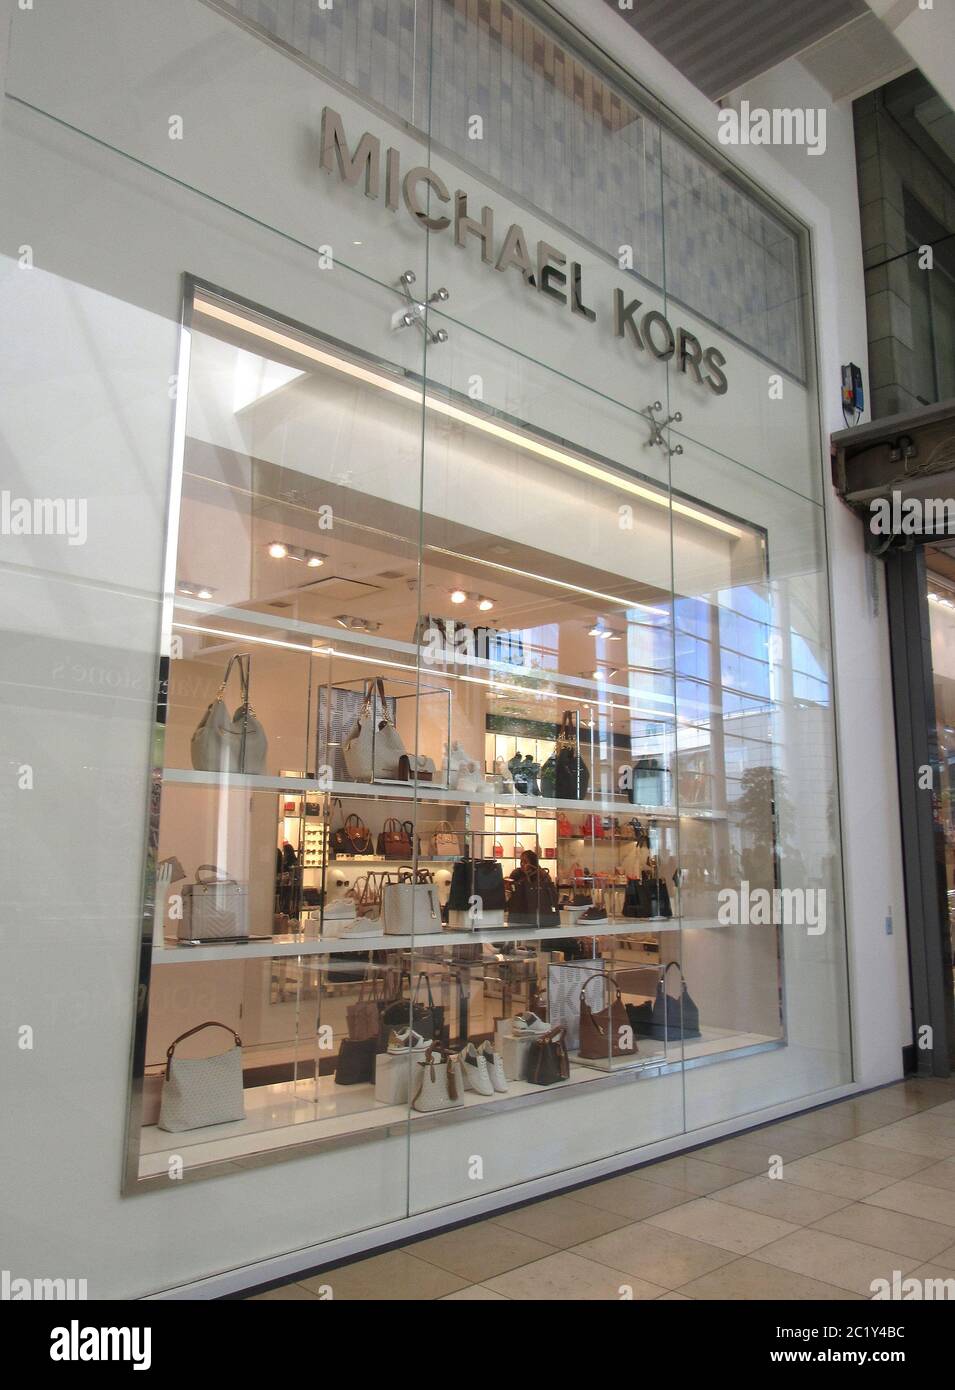 15, 2020, London, United Kingdom: Michael Kors store seen in a retail shopping centre. (Credit Image: © Keith Mayhew/SOPA Images via ZUMA Wire Photo - Alamy